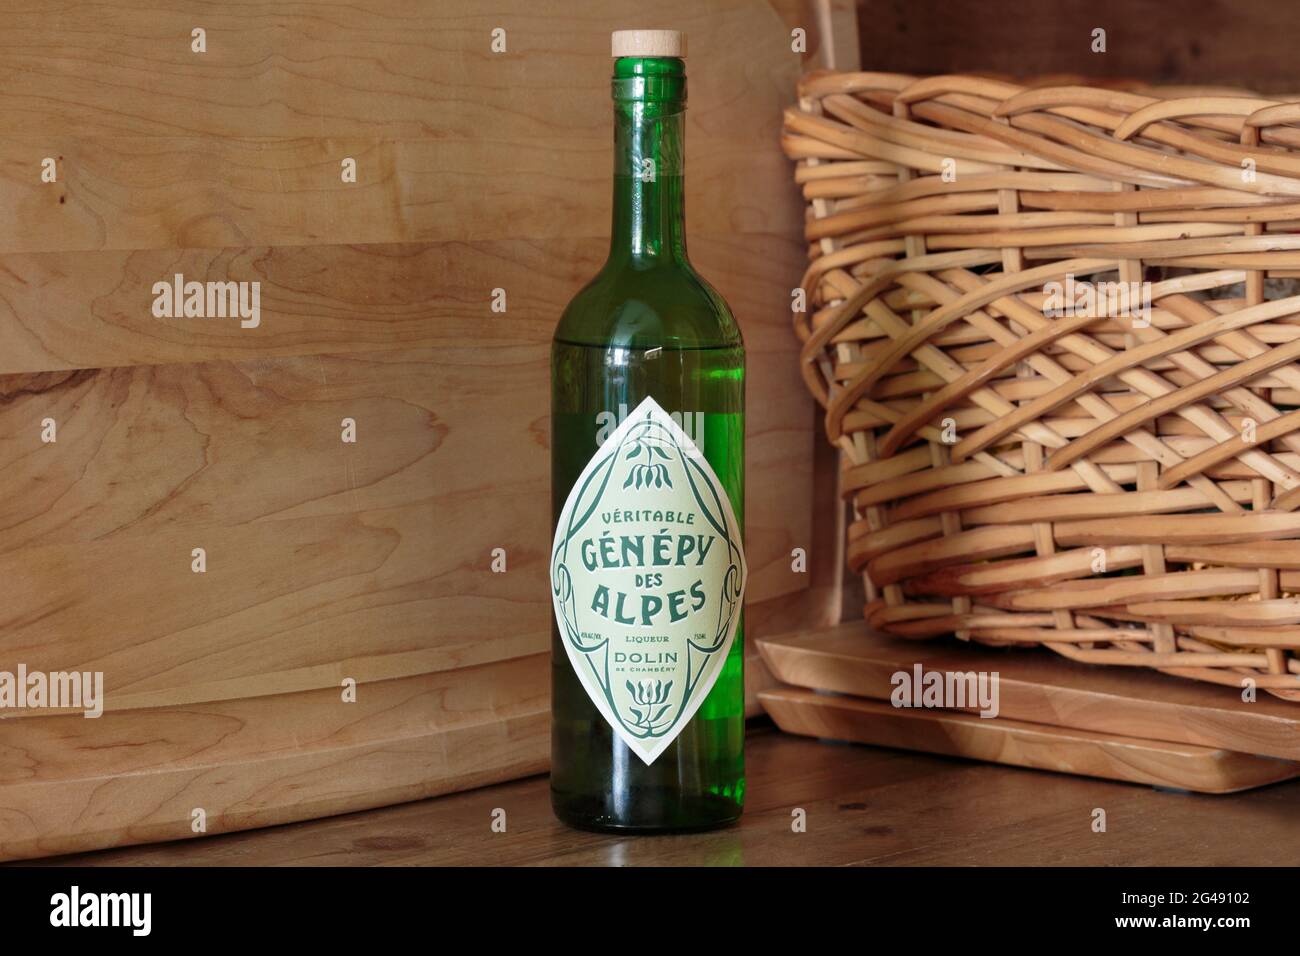 bottle of Dolin Genepy des Alpes, an herbal alpine liquer, an aperitif or digestif or used in cocktails, made from the genepi herb of the Artemisia ge Stock Photo